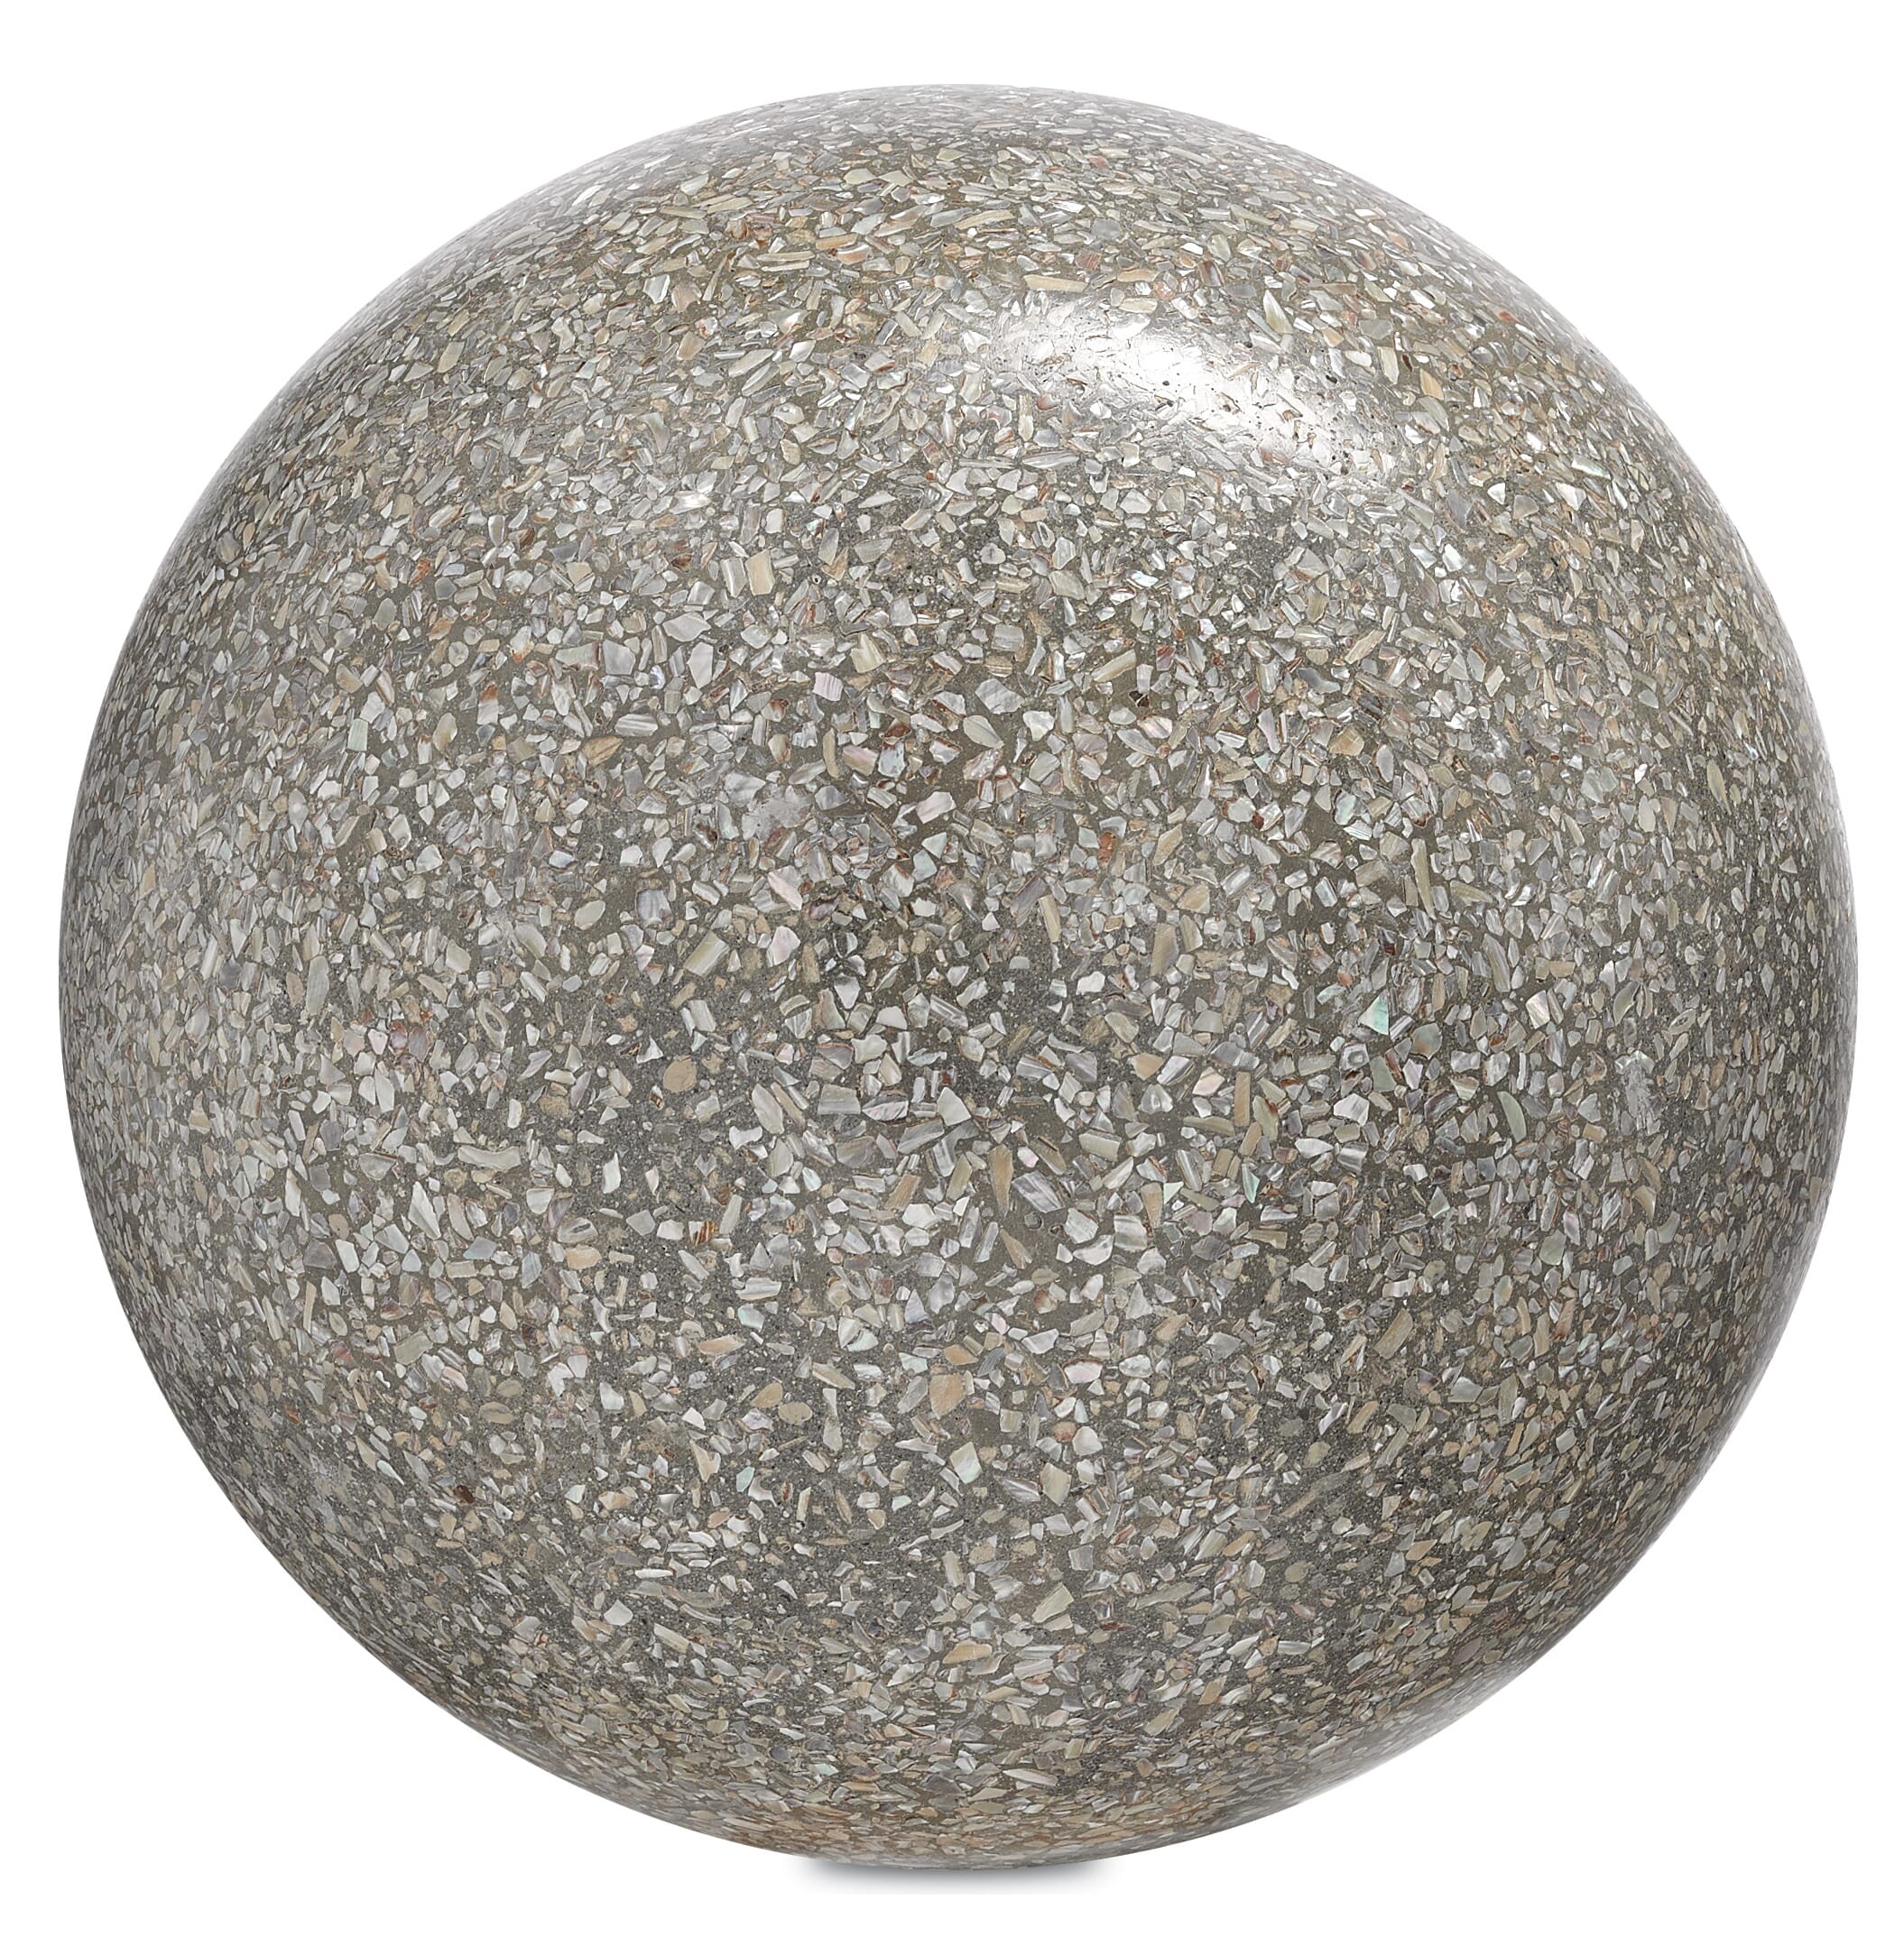 Currey & Company 10" Abalone Large Concrete Ball in Abalone